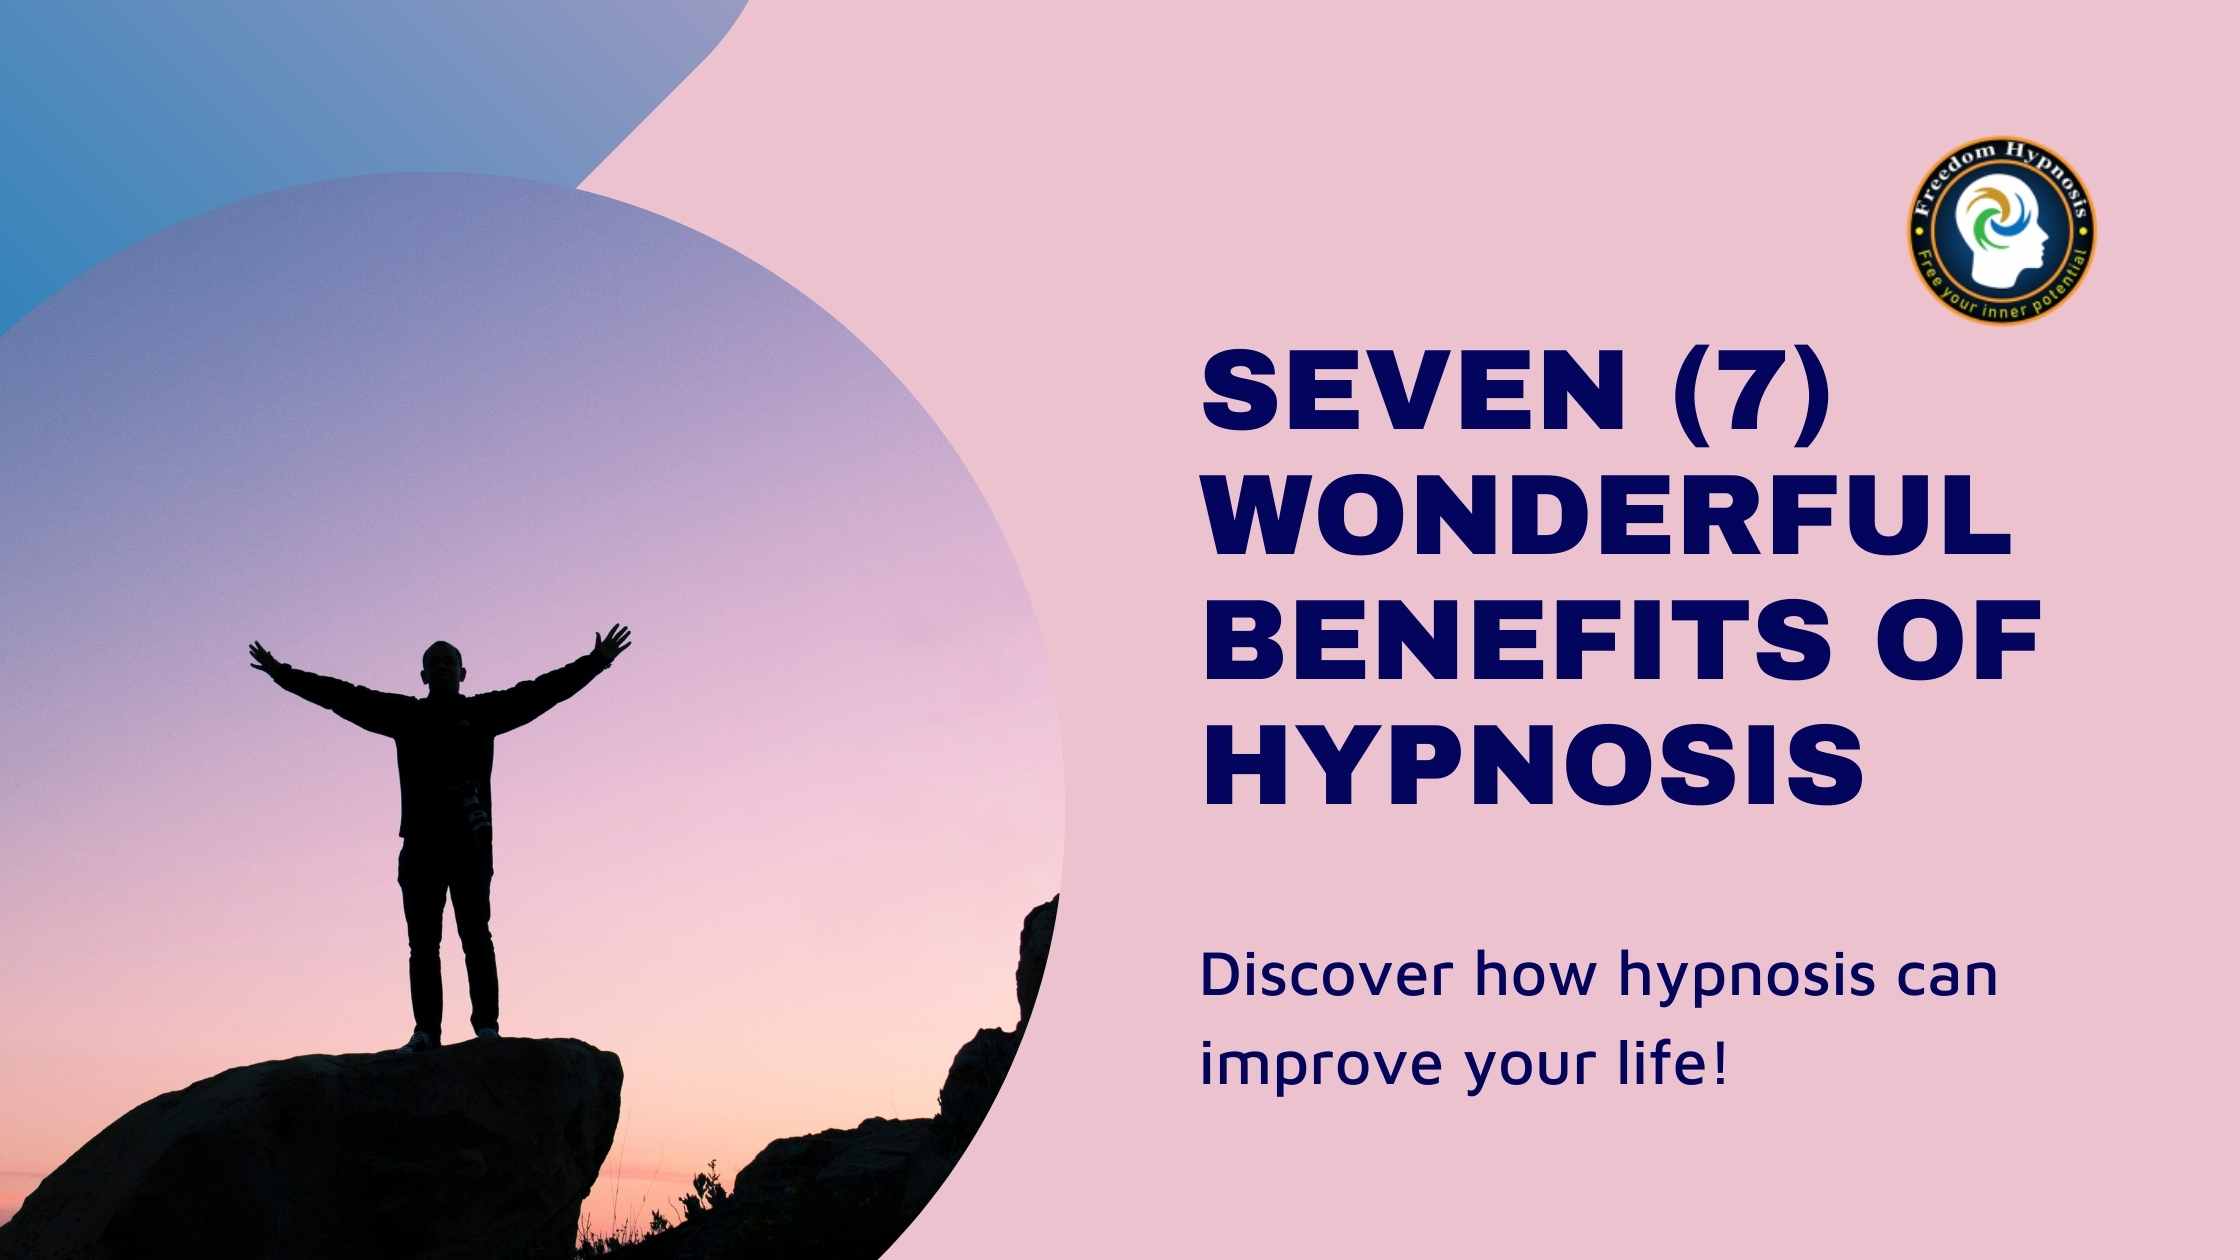 Hypnosis Benefits you can experience with Freedom Hypnosis NYC sessions